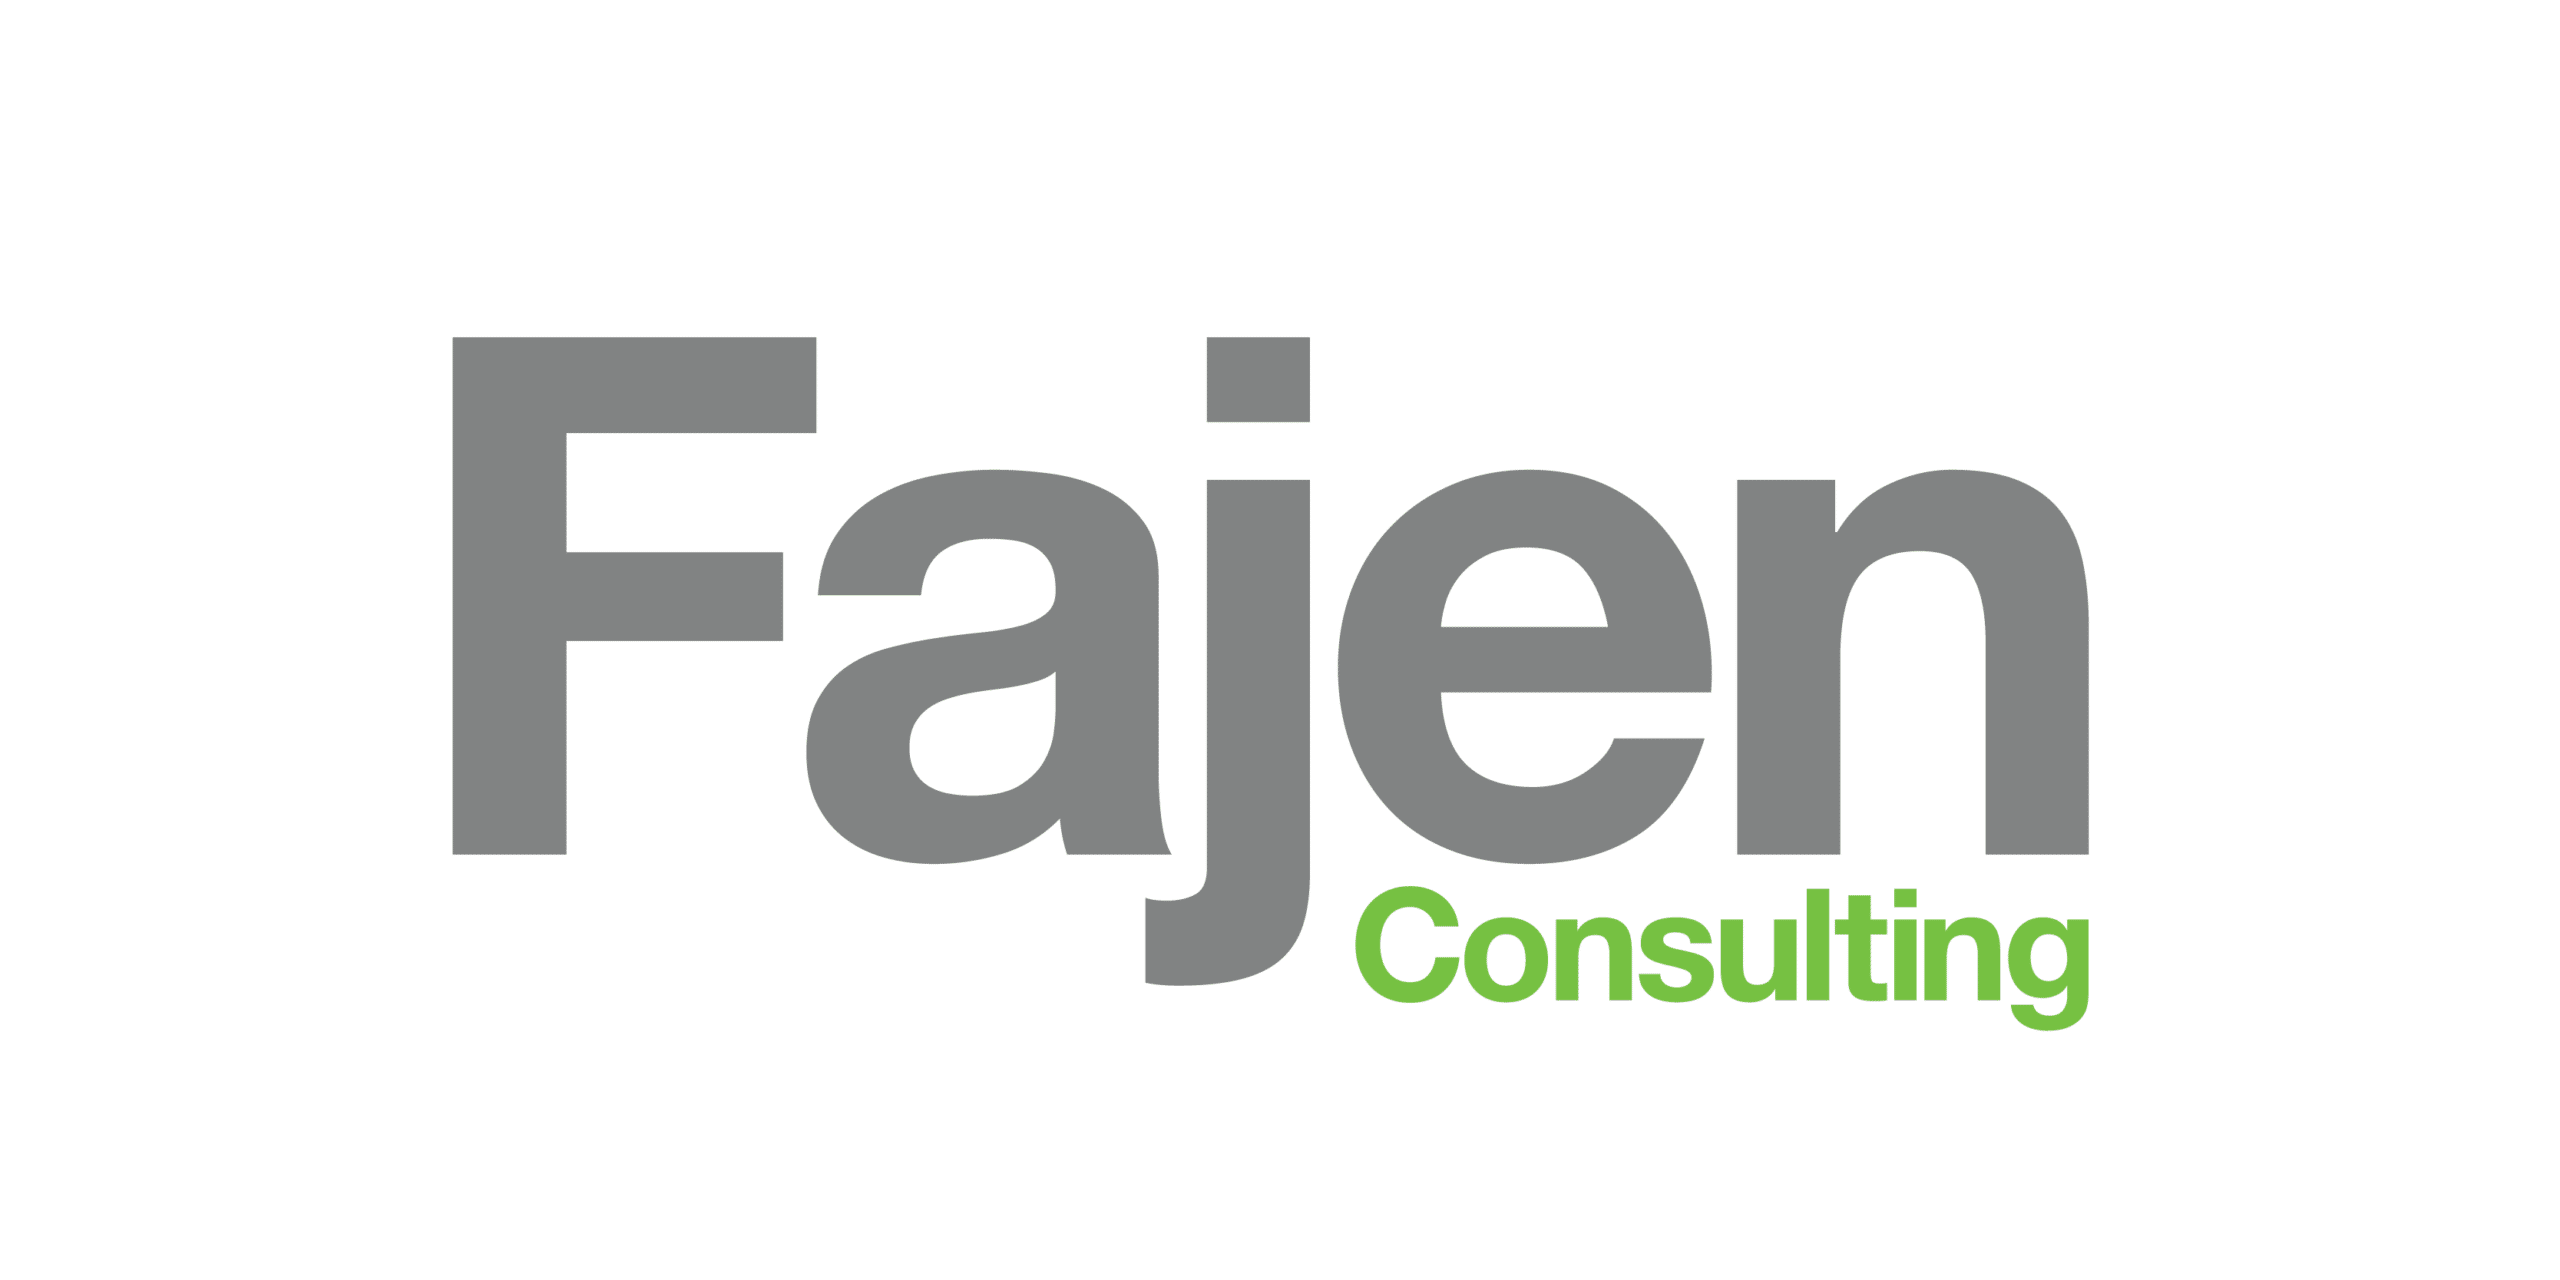 Image of Fajen Consulting